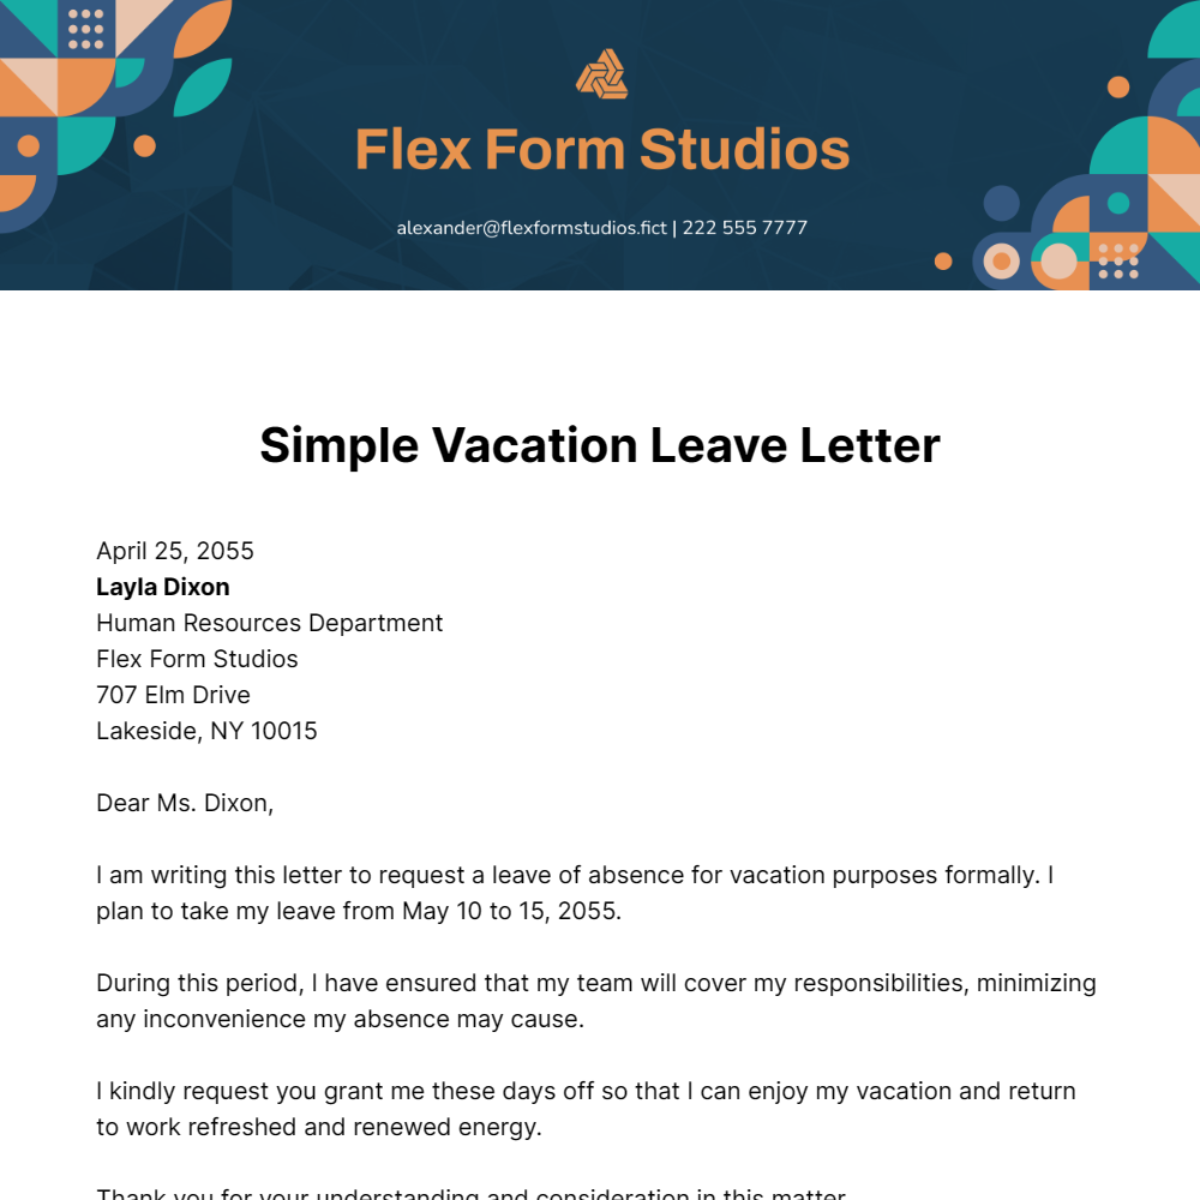 Simple Vacation Leave Letter Template